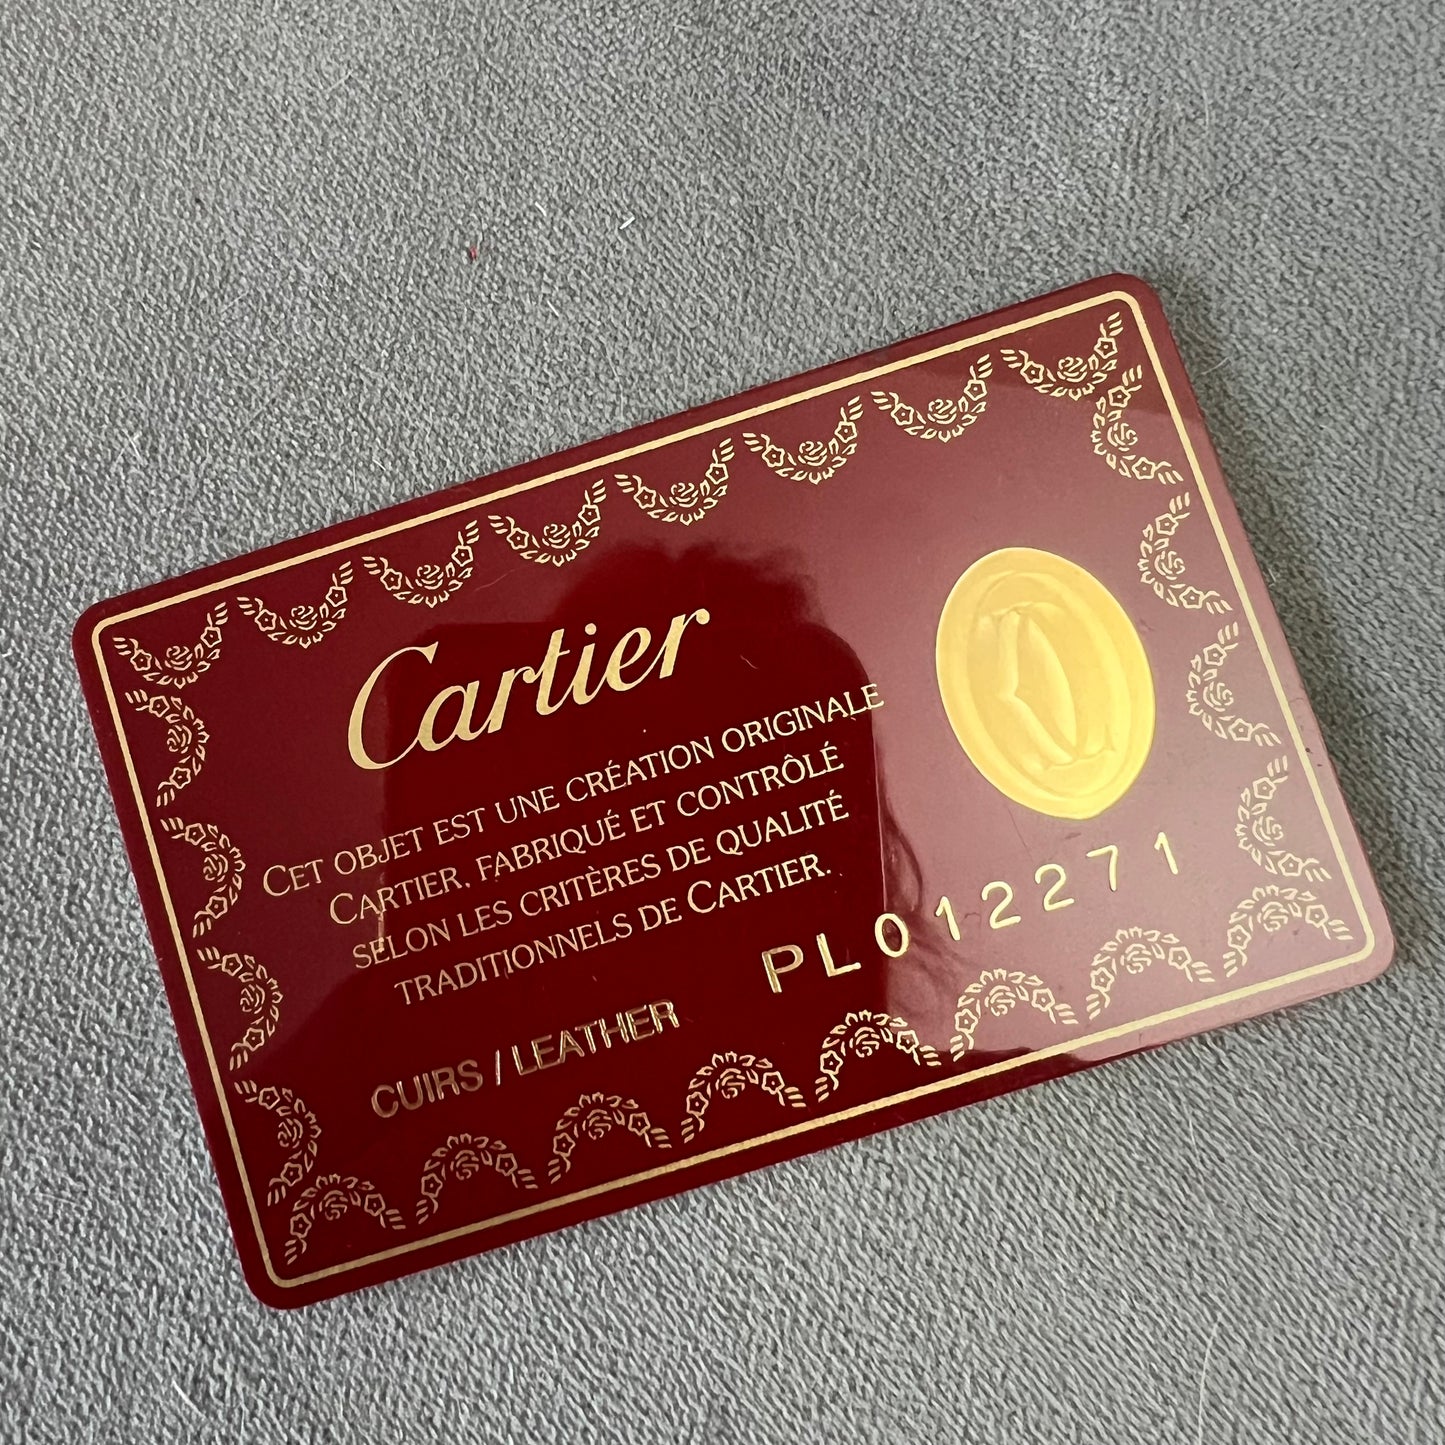 CARTIER Goods Box 6.5x4.75x1.5 inches + Filled Certificate + Ribbon + Booklet